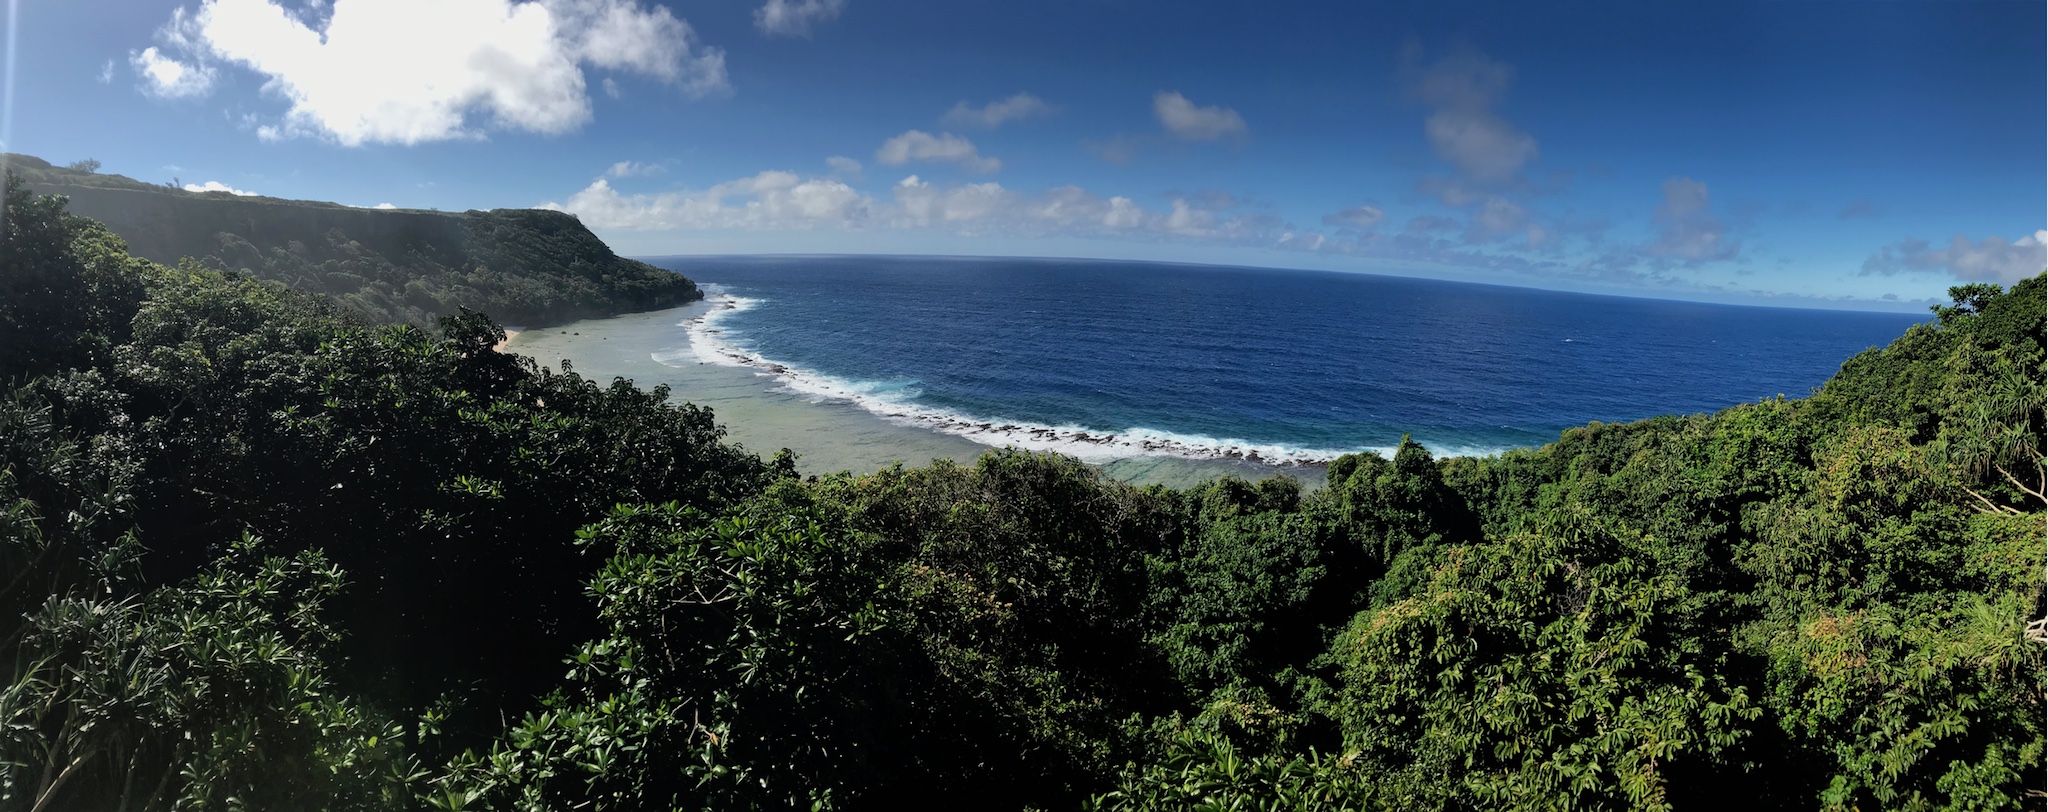 View from the top of the Access Pitch on the Whale wall above Fangatave Beach, Eua island, Tonga.